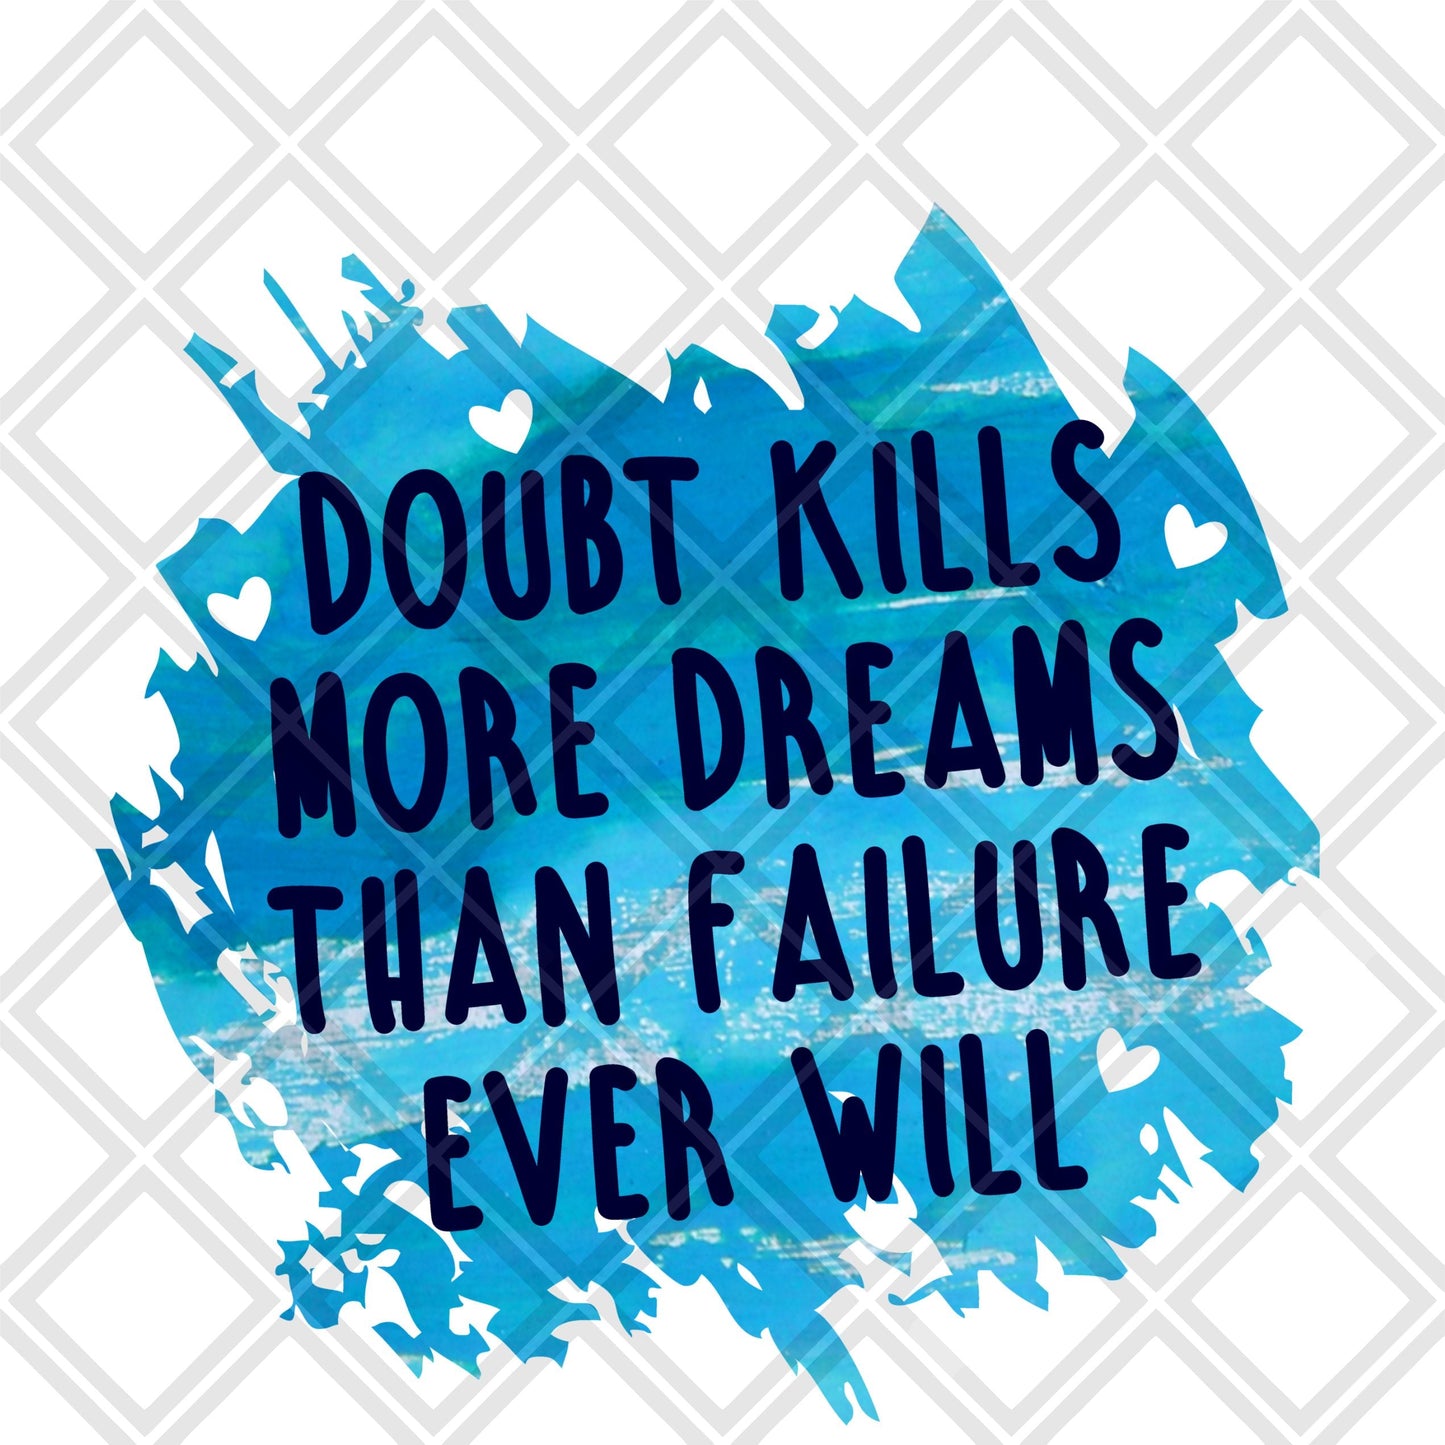 Doubt kills more dream than failure ever will DTF TRANSFERPRINT TO ORDER